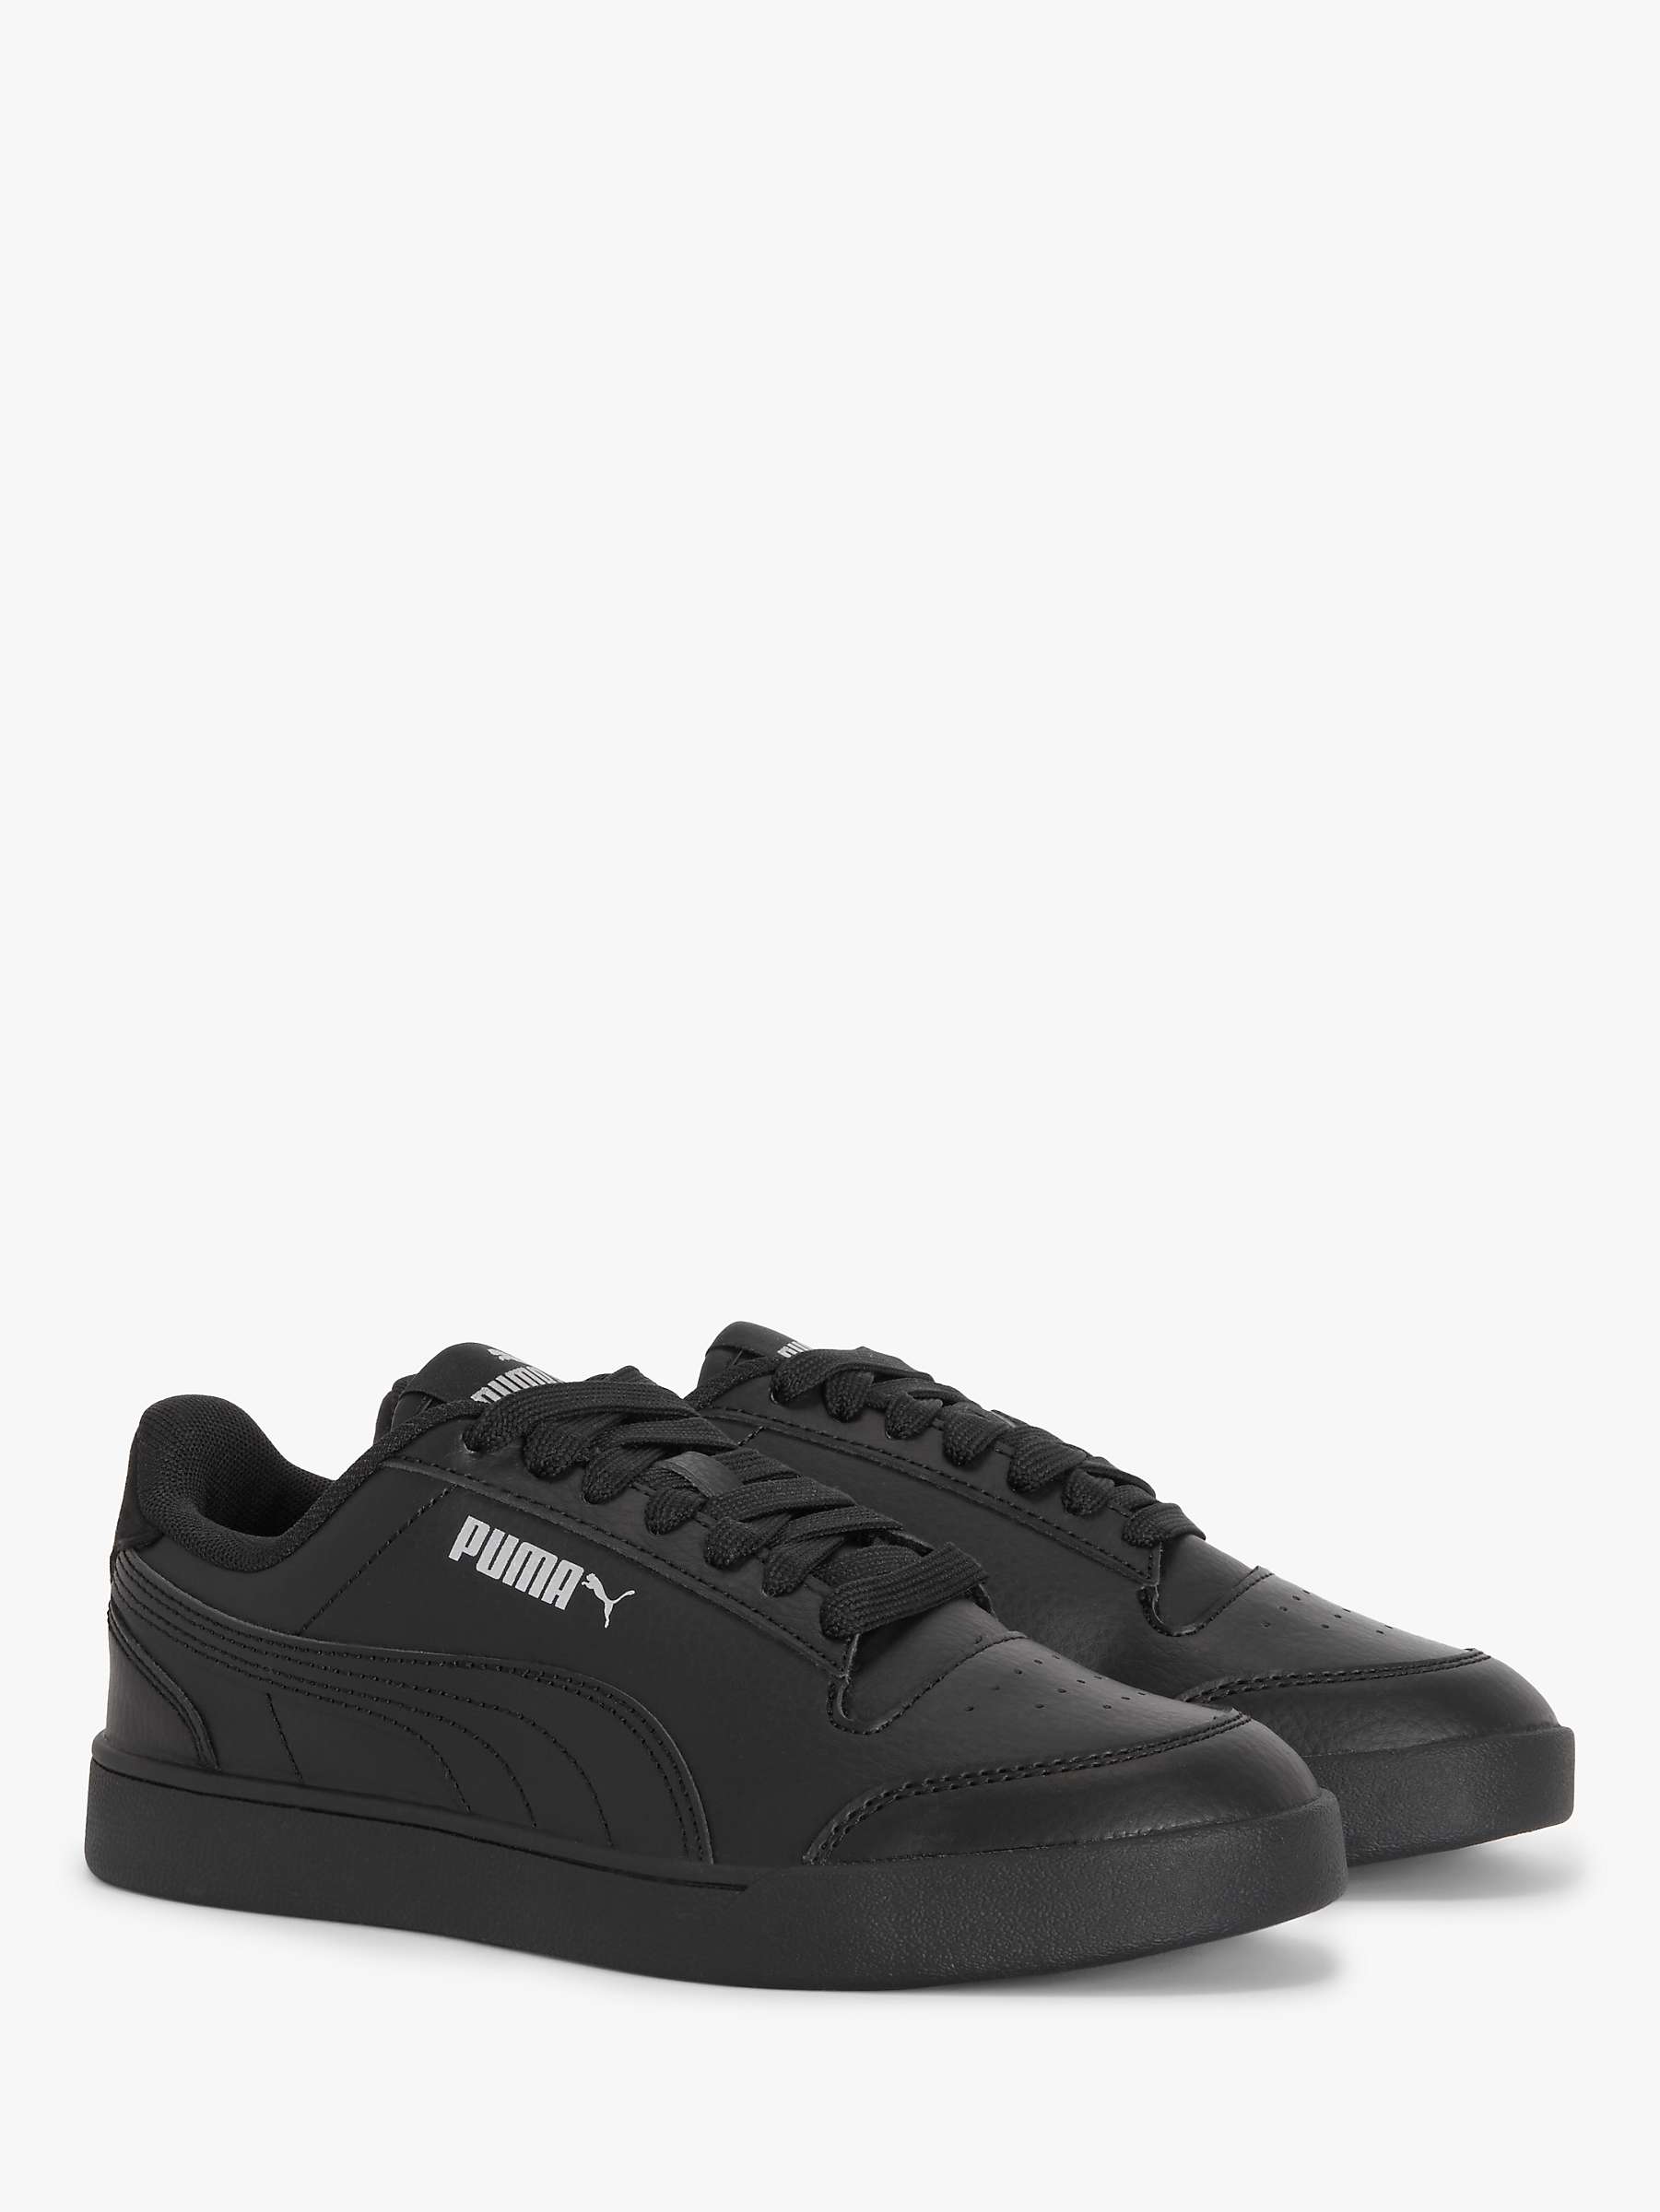 Buy PUMA Kids' Shuffle Trainers Online at johnlewis.com